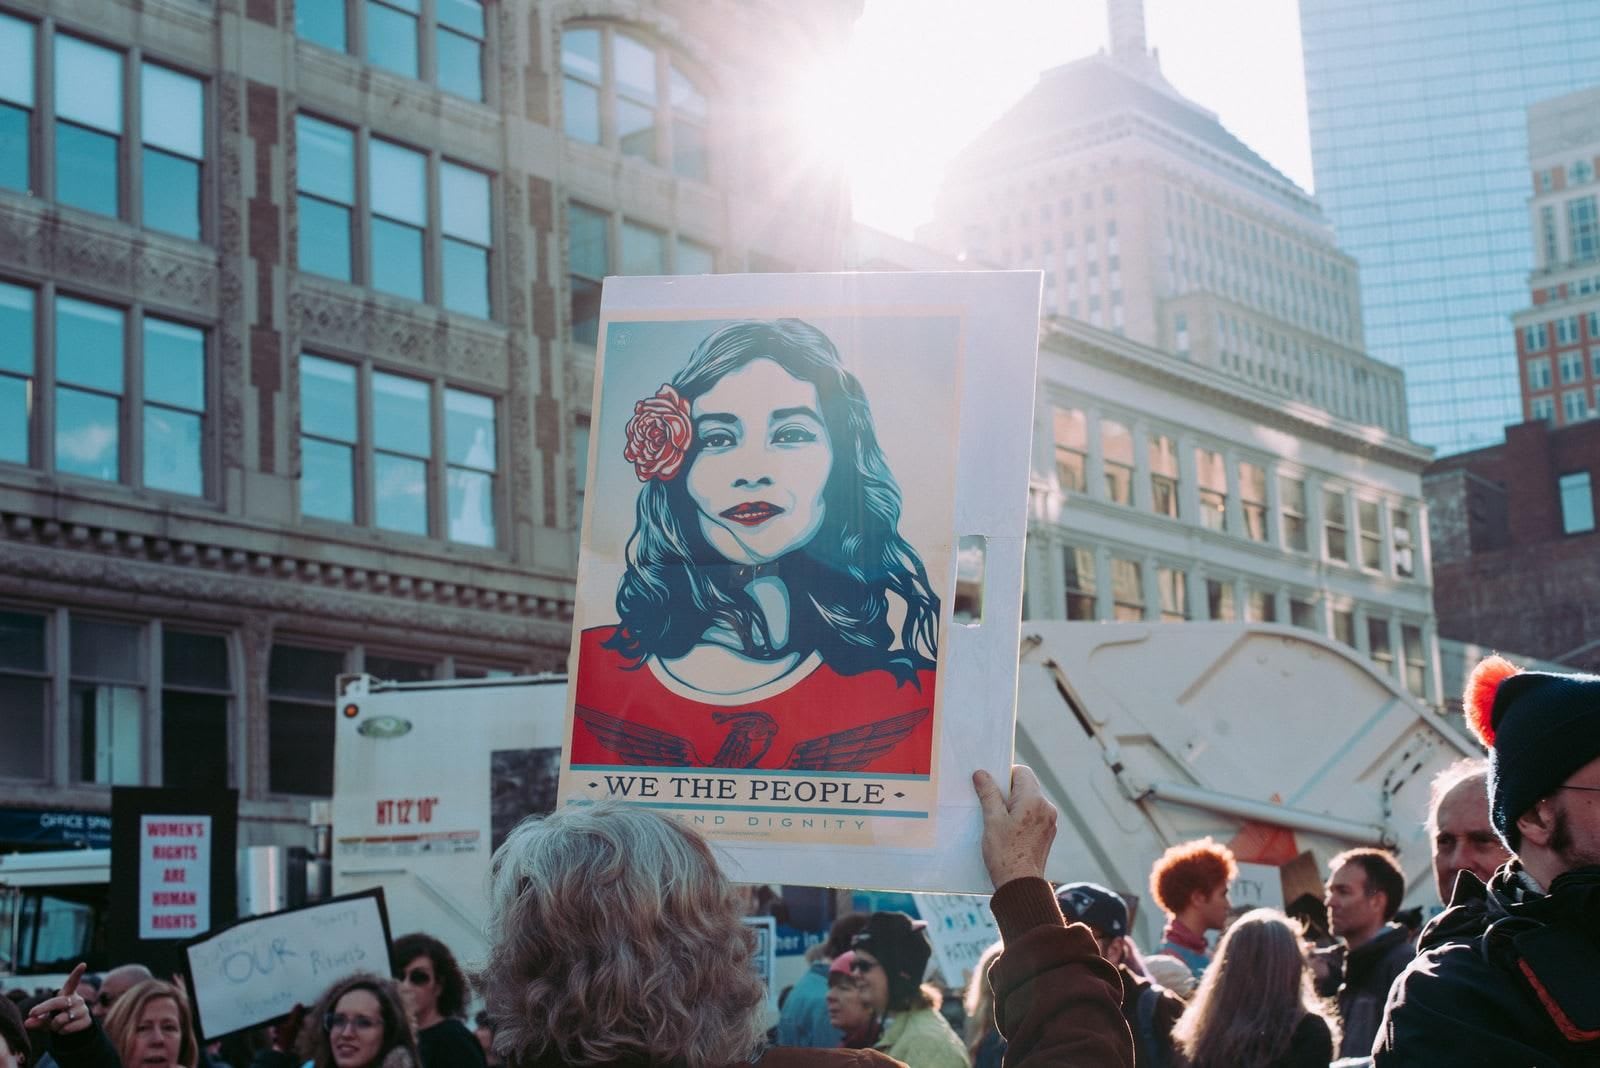 This sign was a trademark of the Women’s Marches around the world on Saturday. The posters were available to download for free and were printed by many as a (literal) sign of solidarity. https://obeygiant.com/people-art-avail-download-free/